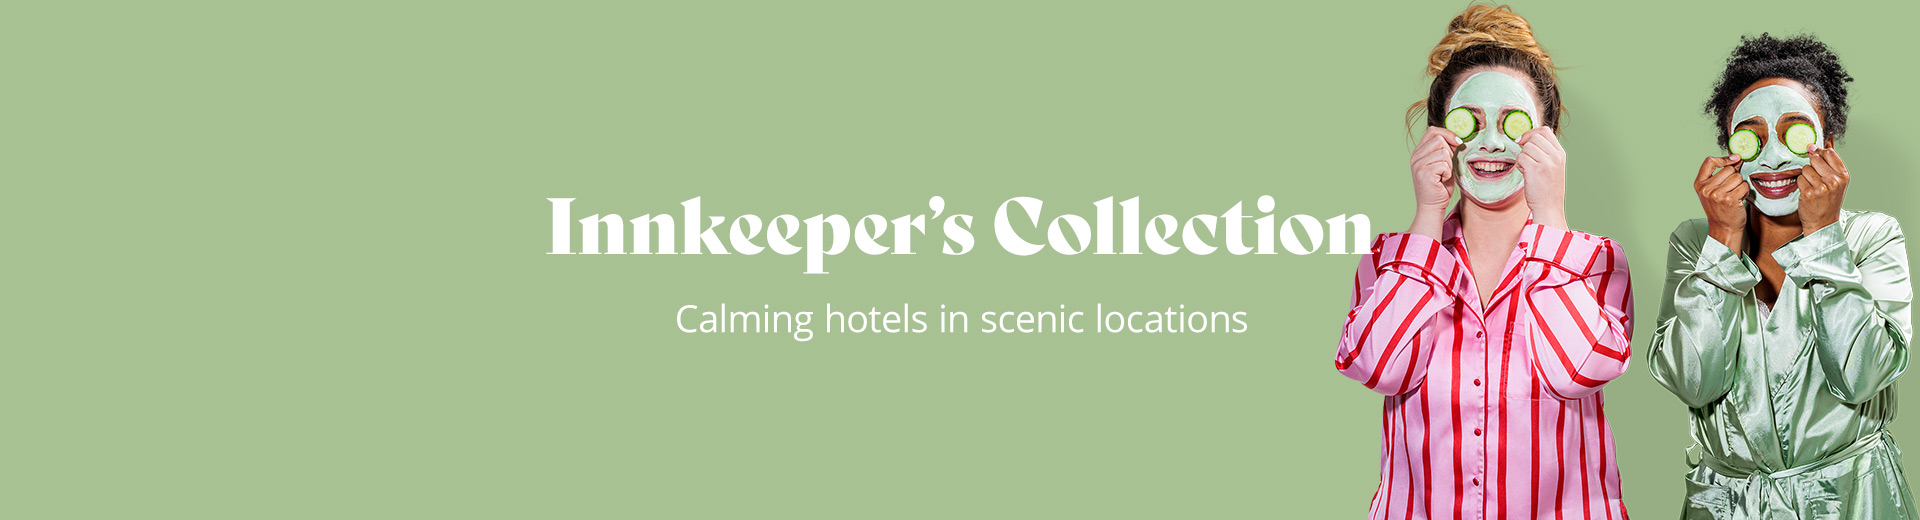 Innkeeper’s Collection: Calming hotels in scenic locations.